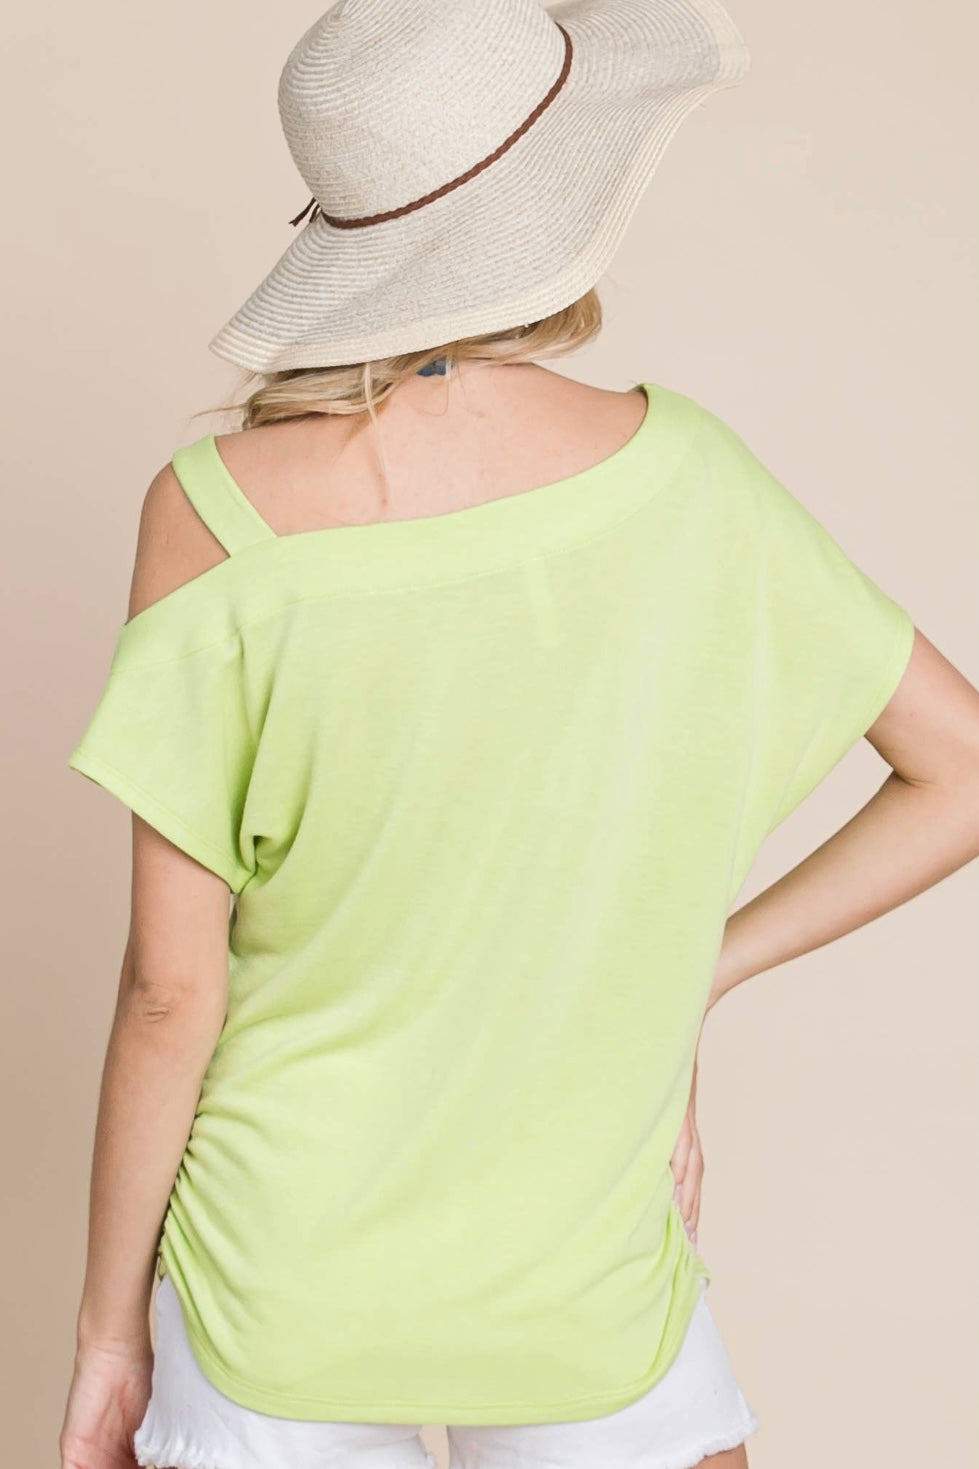 $10 SALE!  Lime Green One Shoulder Top with Side Ruching and Dolman Sleeve